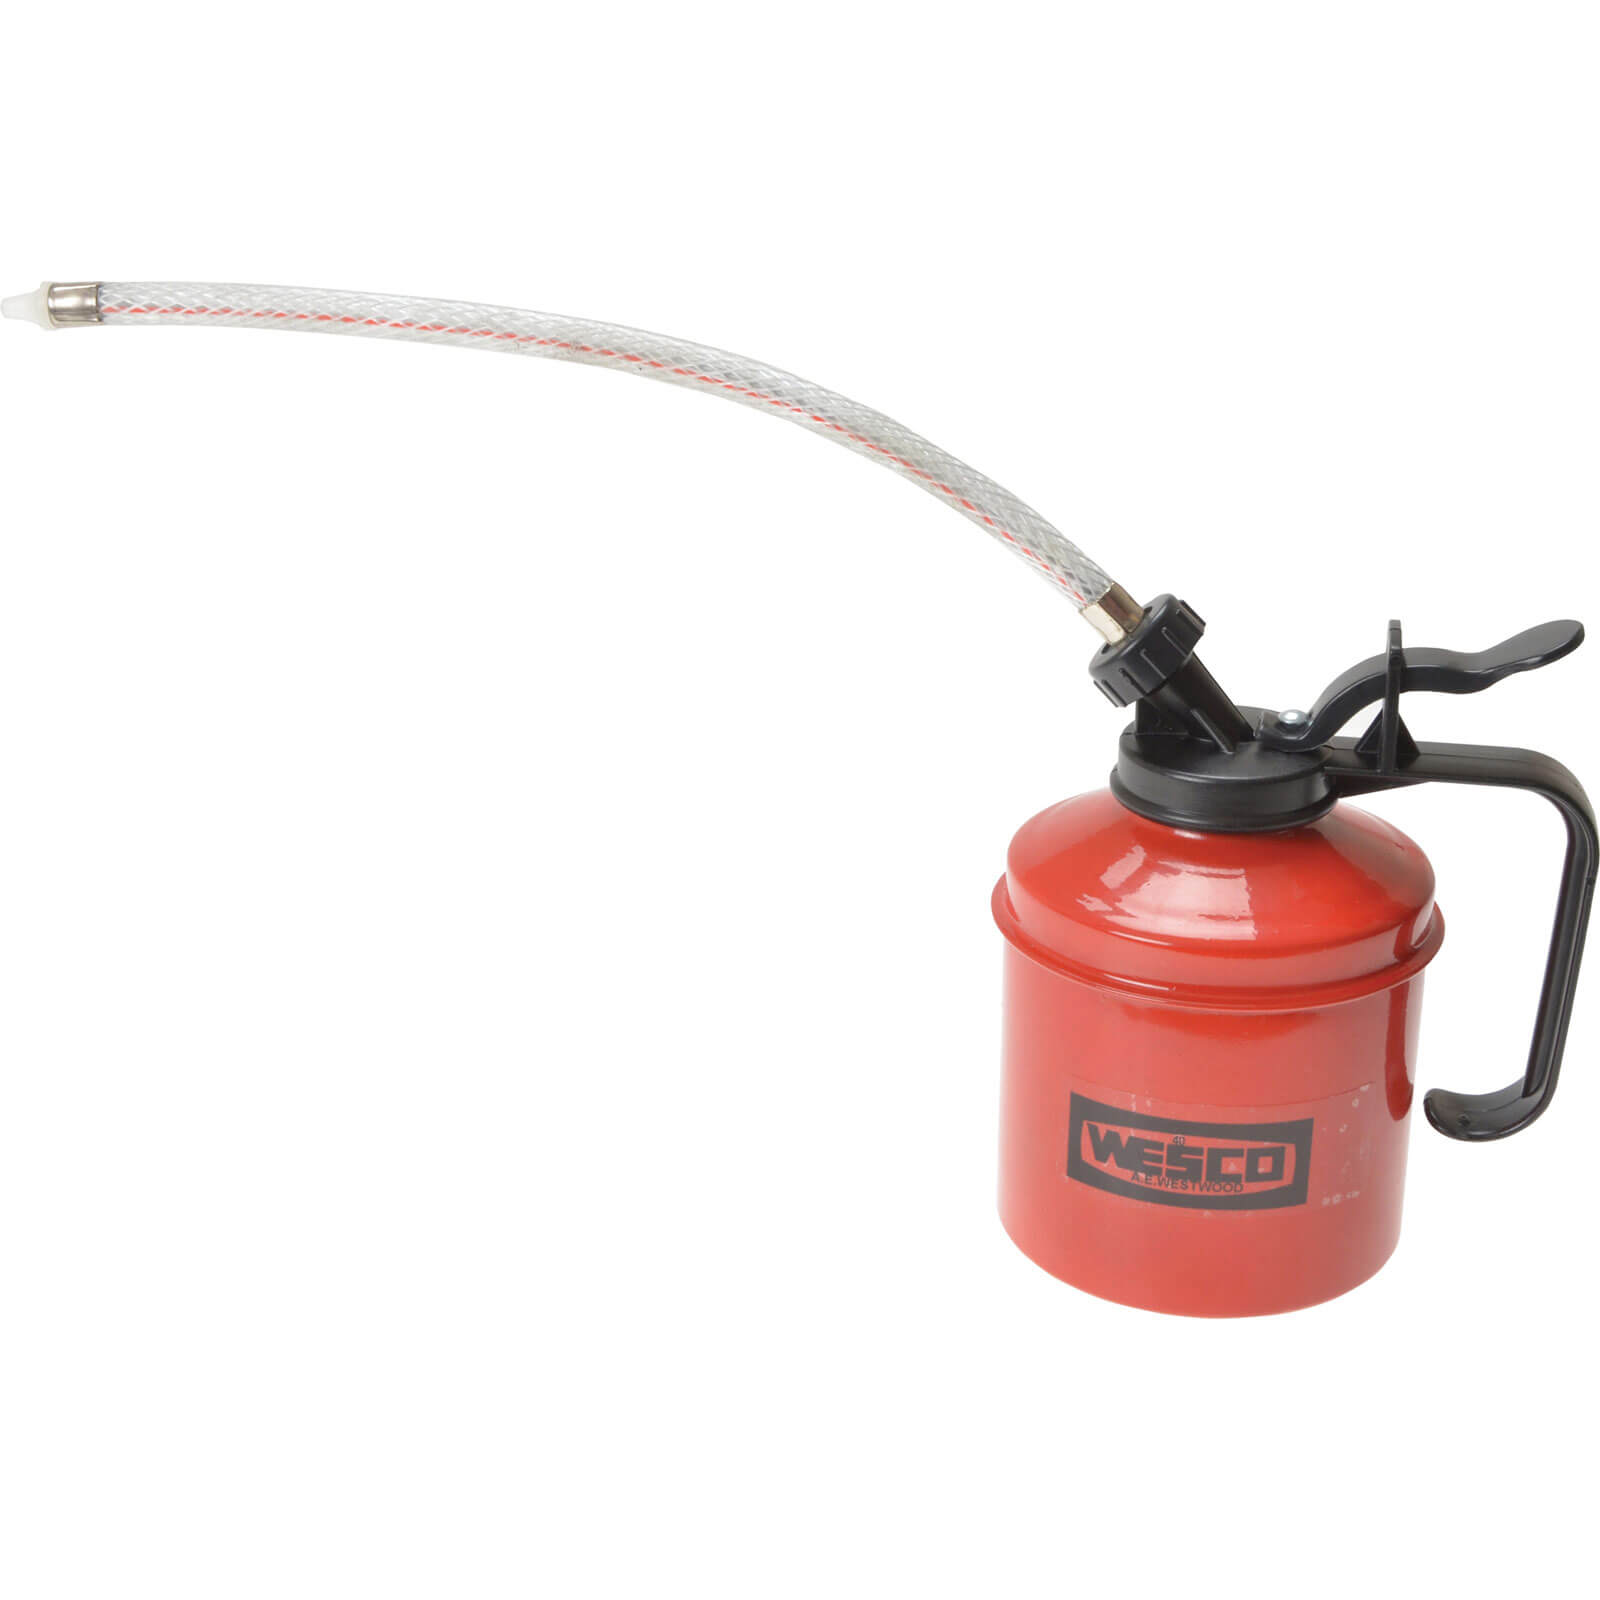 Image of Wesco Metal Oil Can and Flexible Spout 500ml